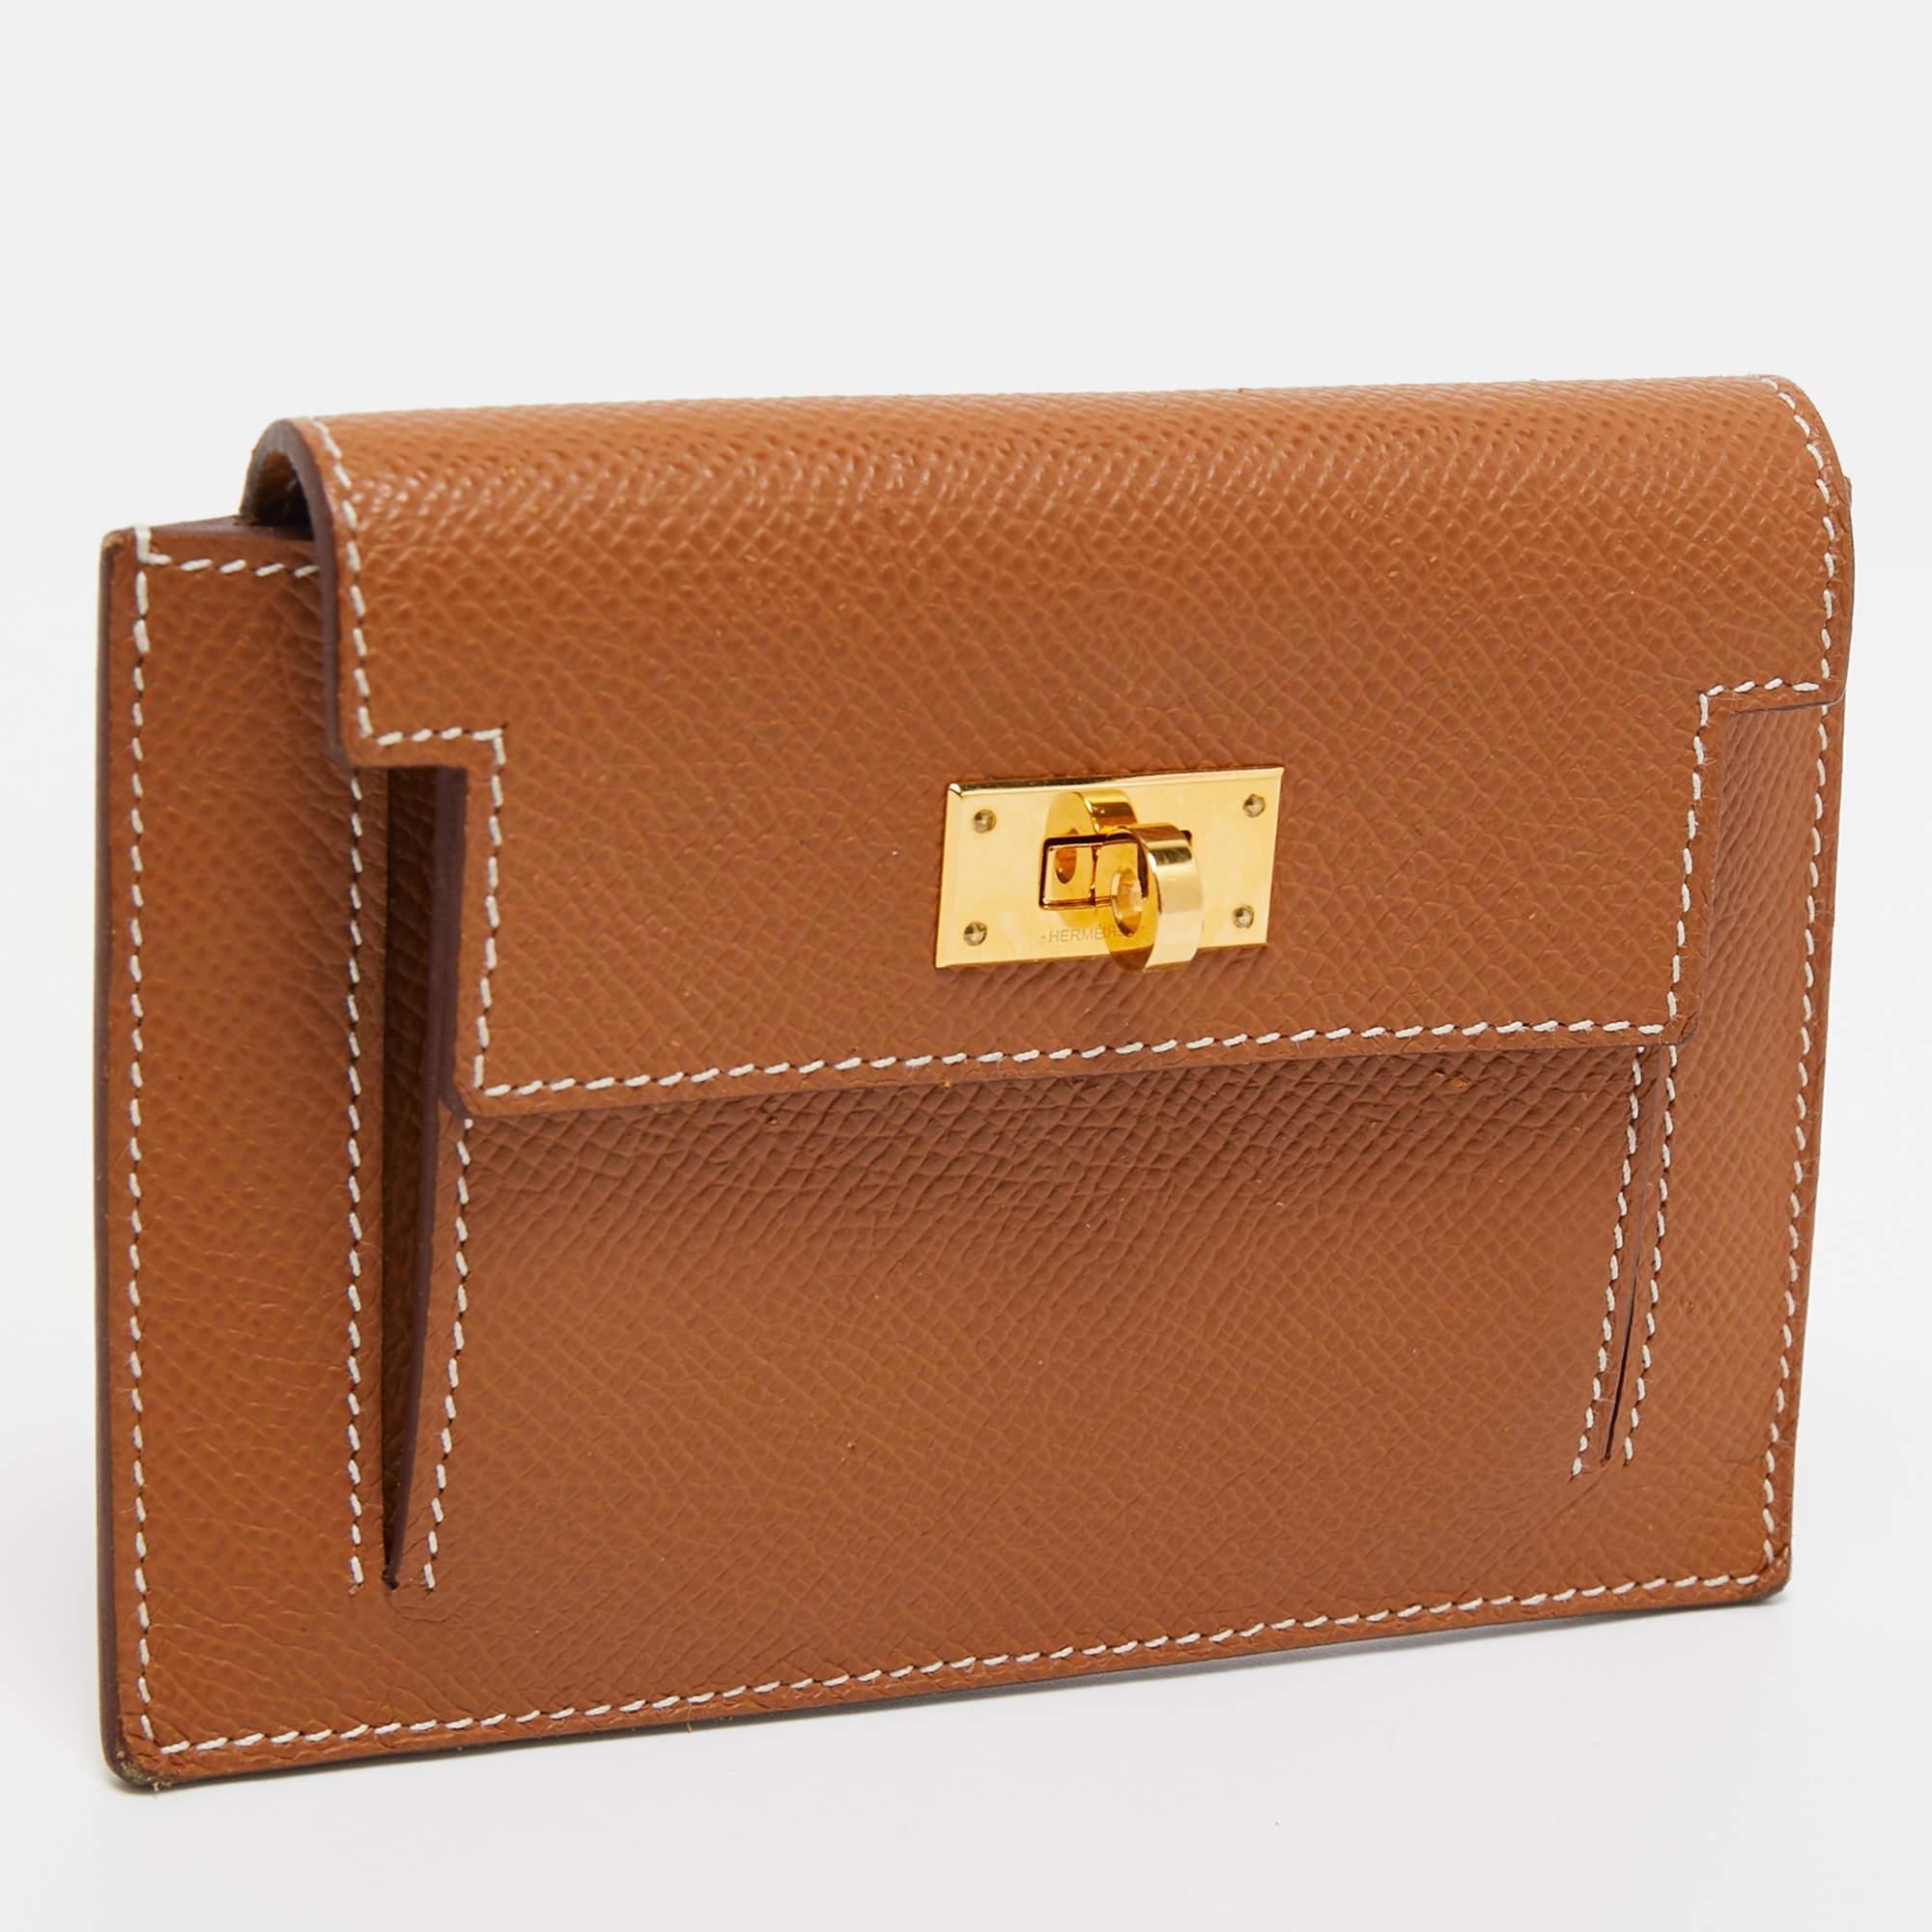 This classy Hermes wallet brings along a touch of luxury and immense style. It comes perfectly crafted to neatly carry your cards and cash.

